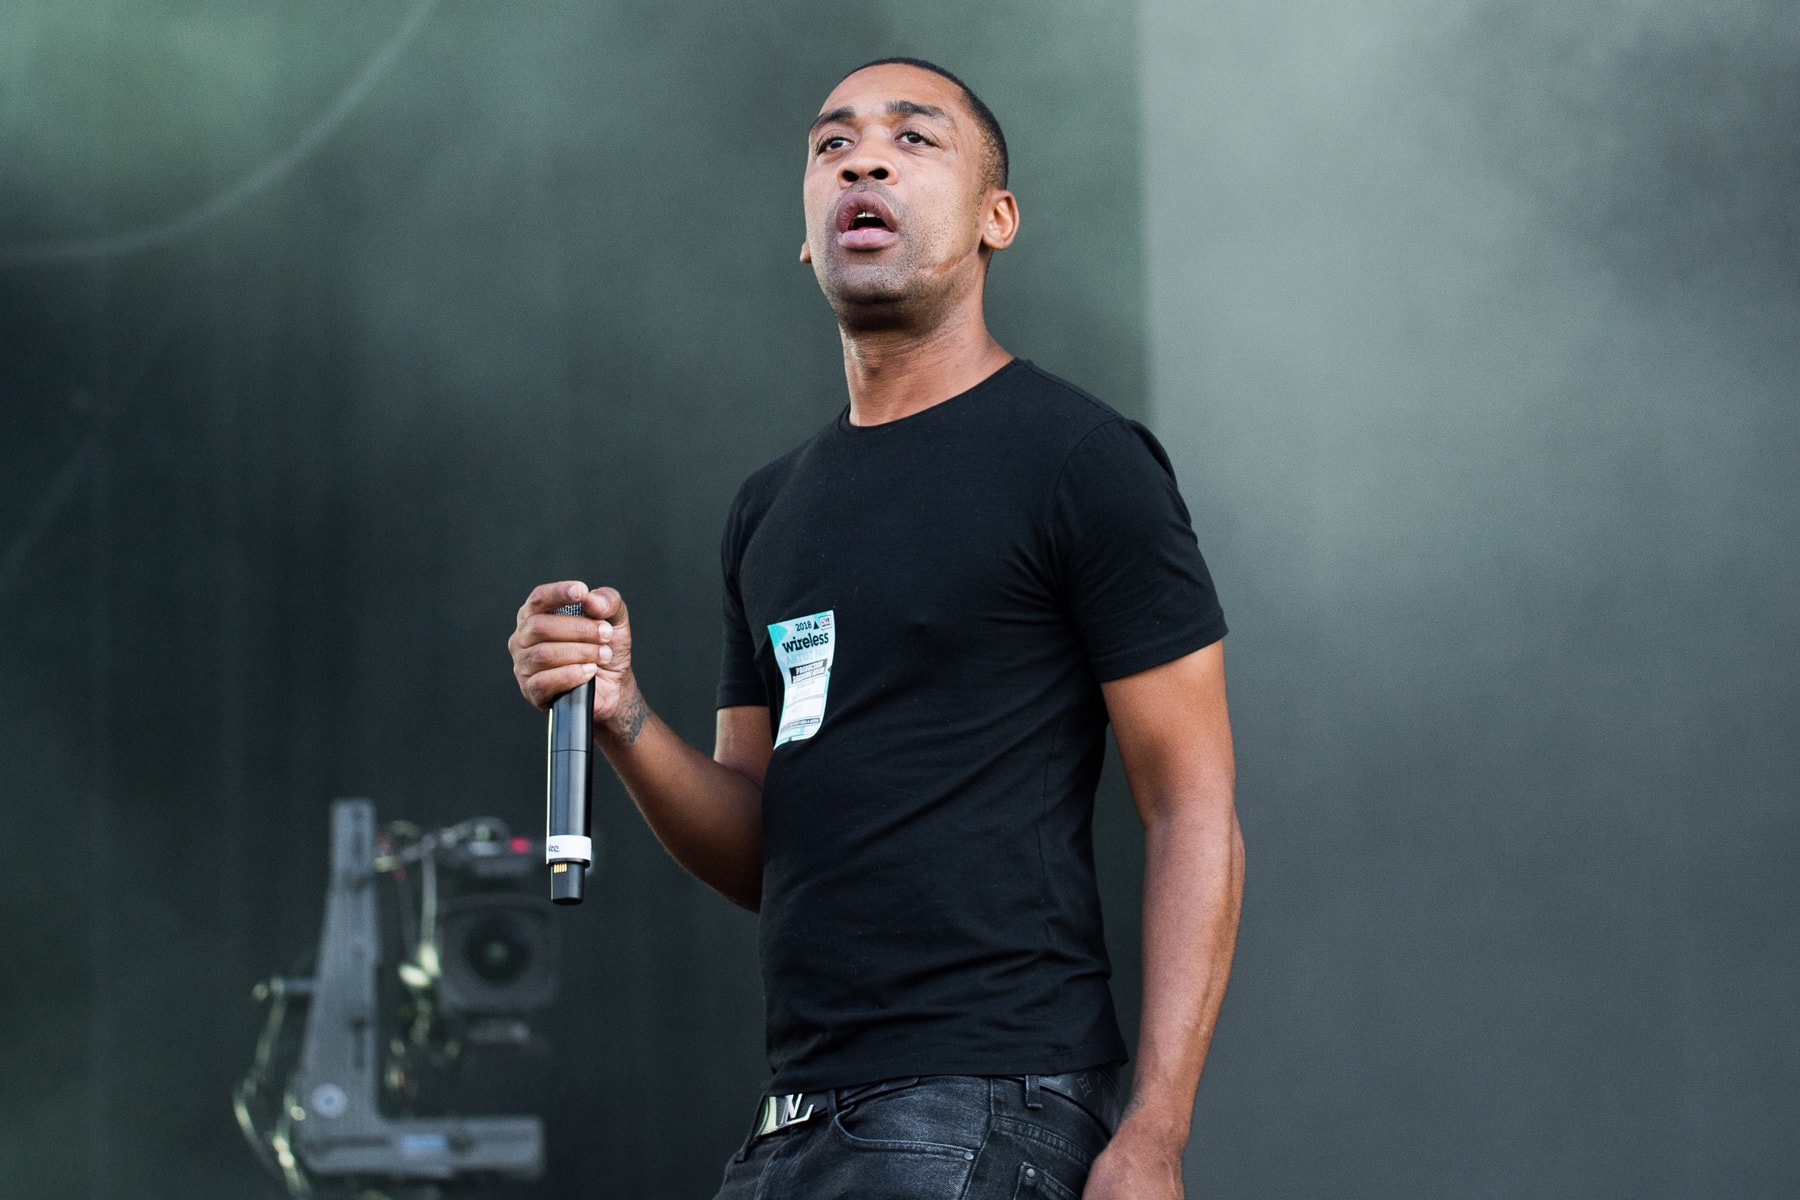 Wiley Drops Three New Singles for International Grime Day eski sound listen now stream youtube curiosity killed the cat disrespect the game grime road rap 140 garage godfather 3 